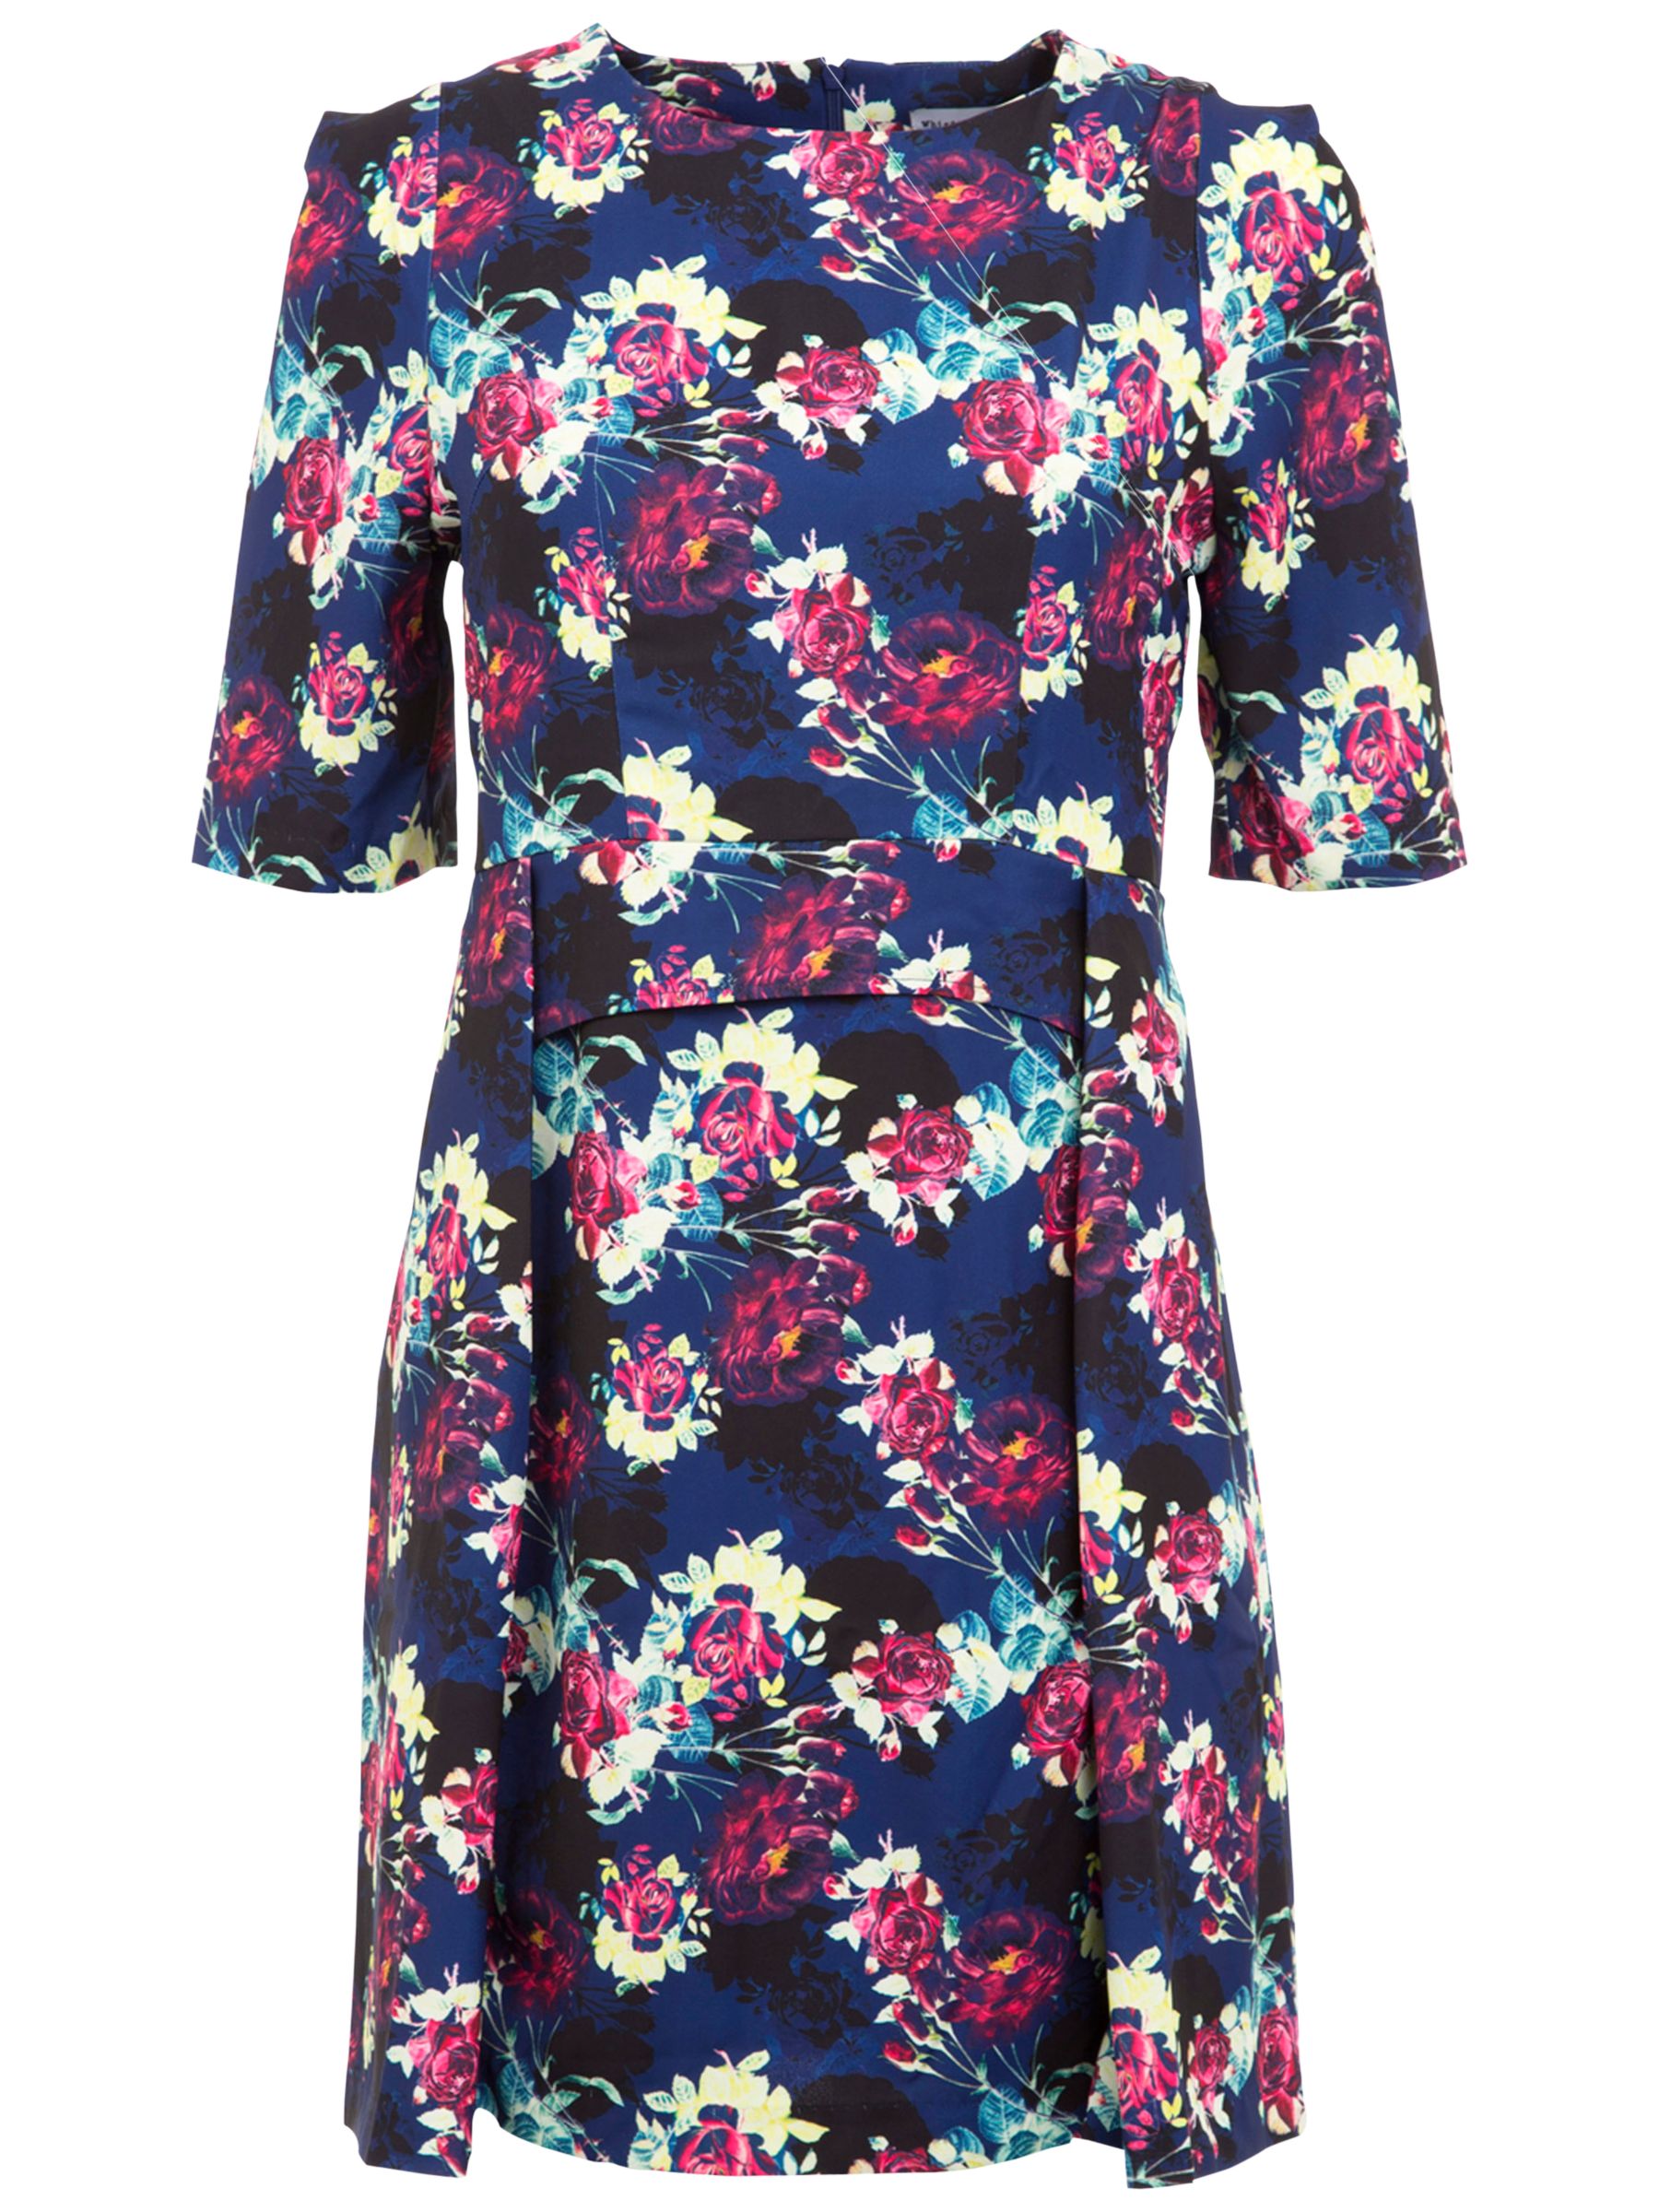 Buy Wolf & Whistle Floral Print Dress, Multi Online at johnlewis.com